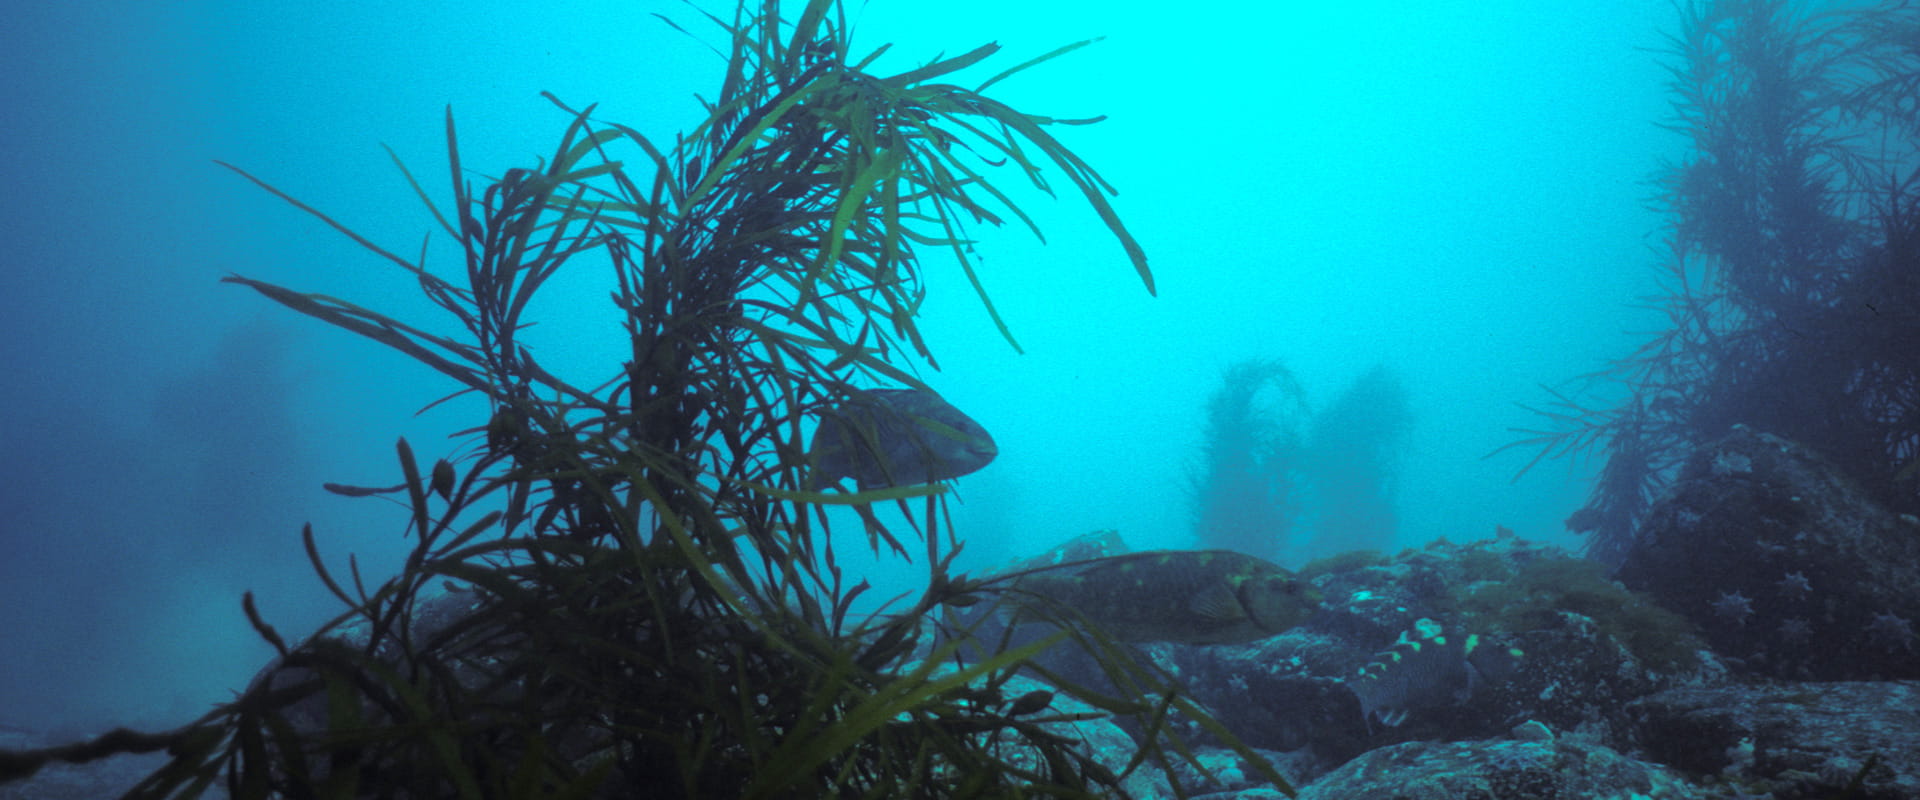 Two fish swim amongst kelp and a rocky seabed. Some of the rocks have clusters of starfish.